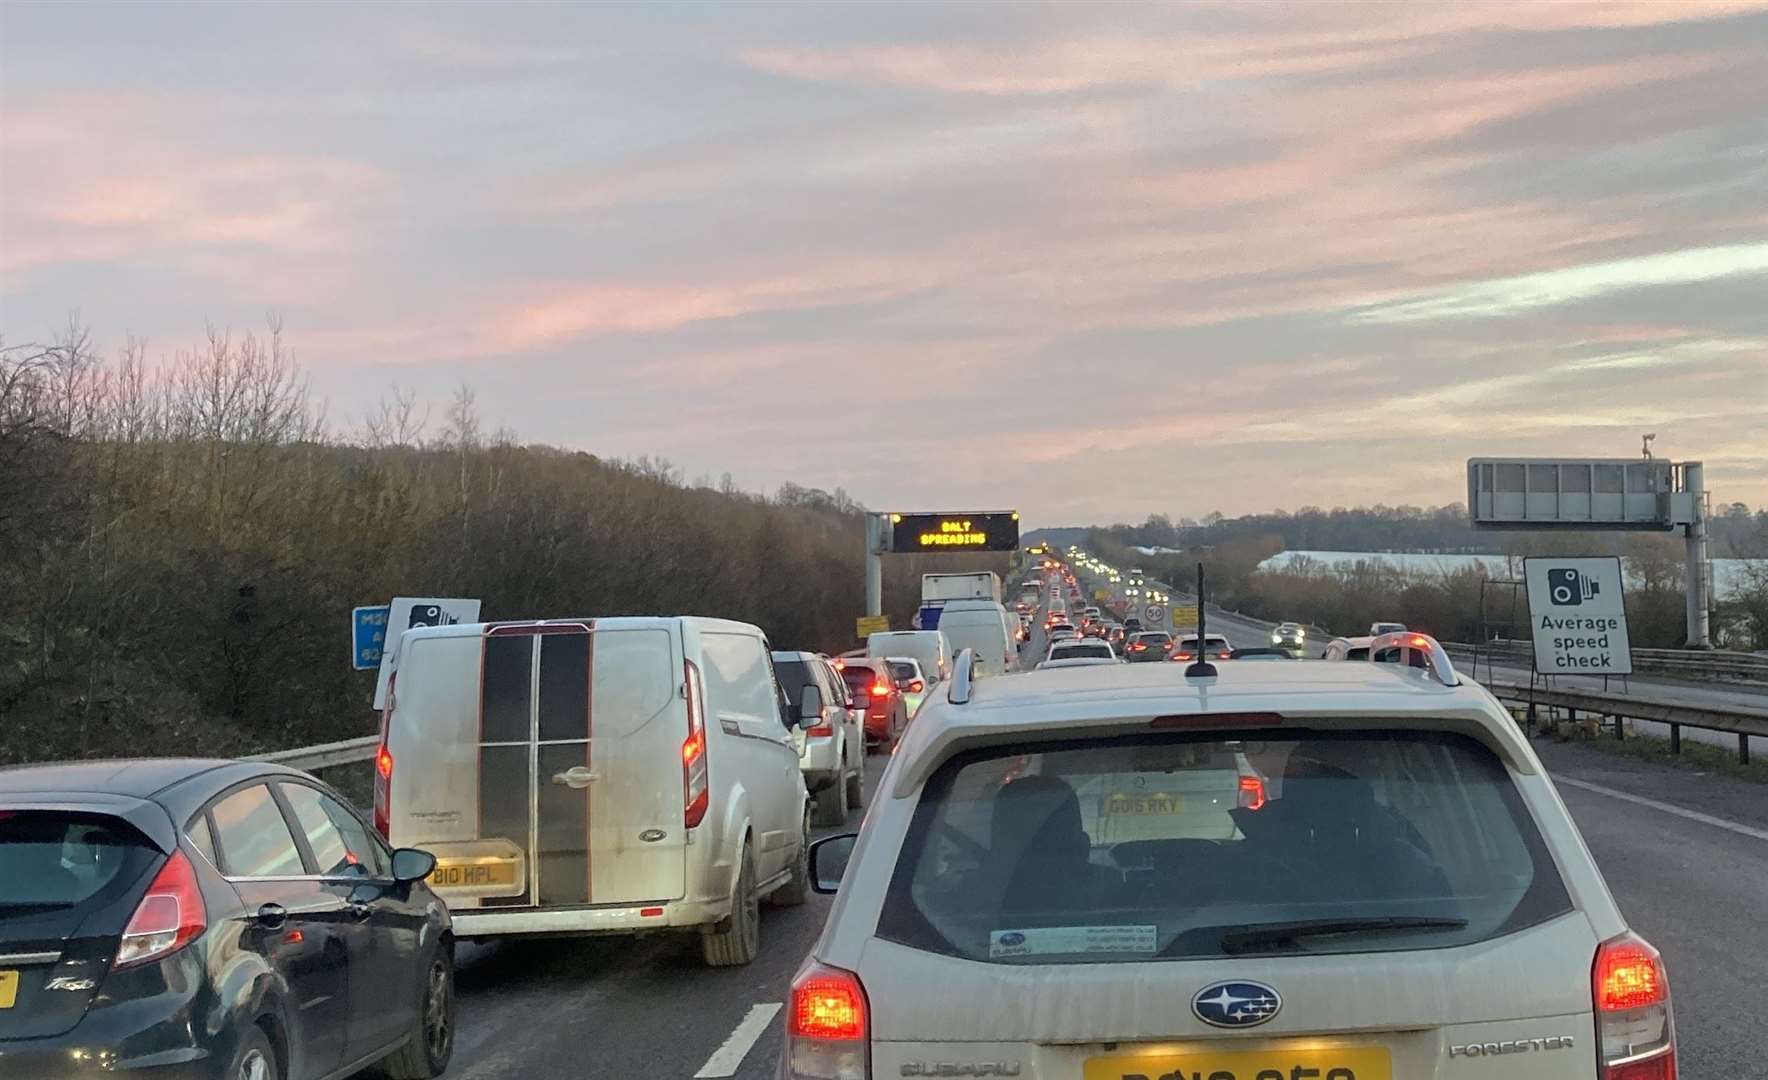 Traffic is at a standstill on the M20